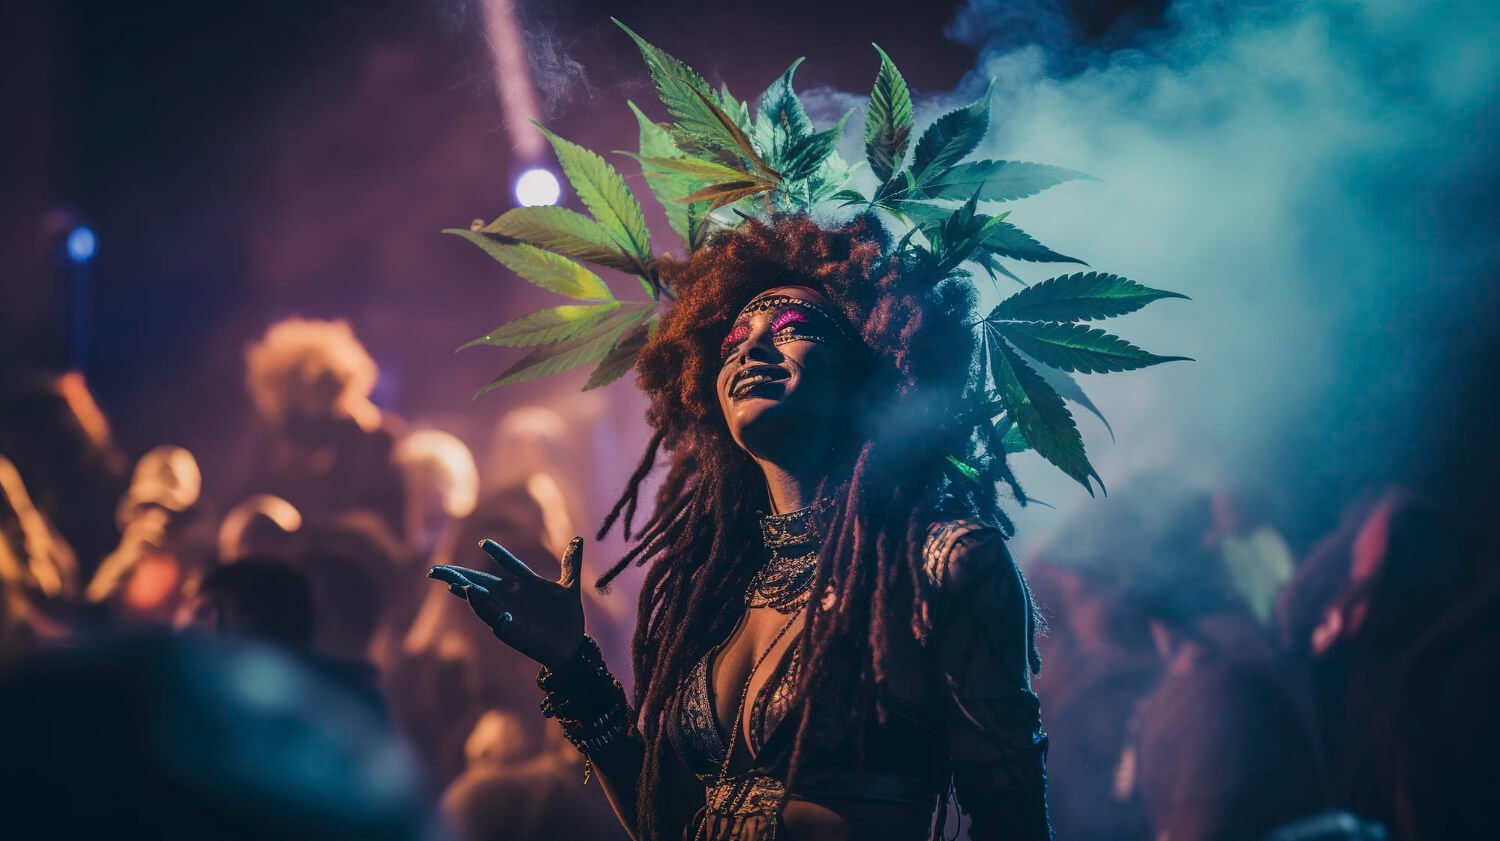 Mundelein, Illinois, hosted the state's first-ever concert that allowed open marijuana consumption